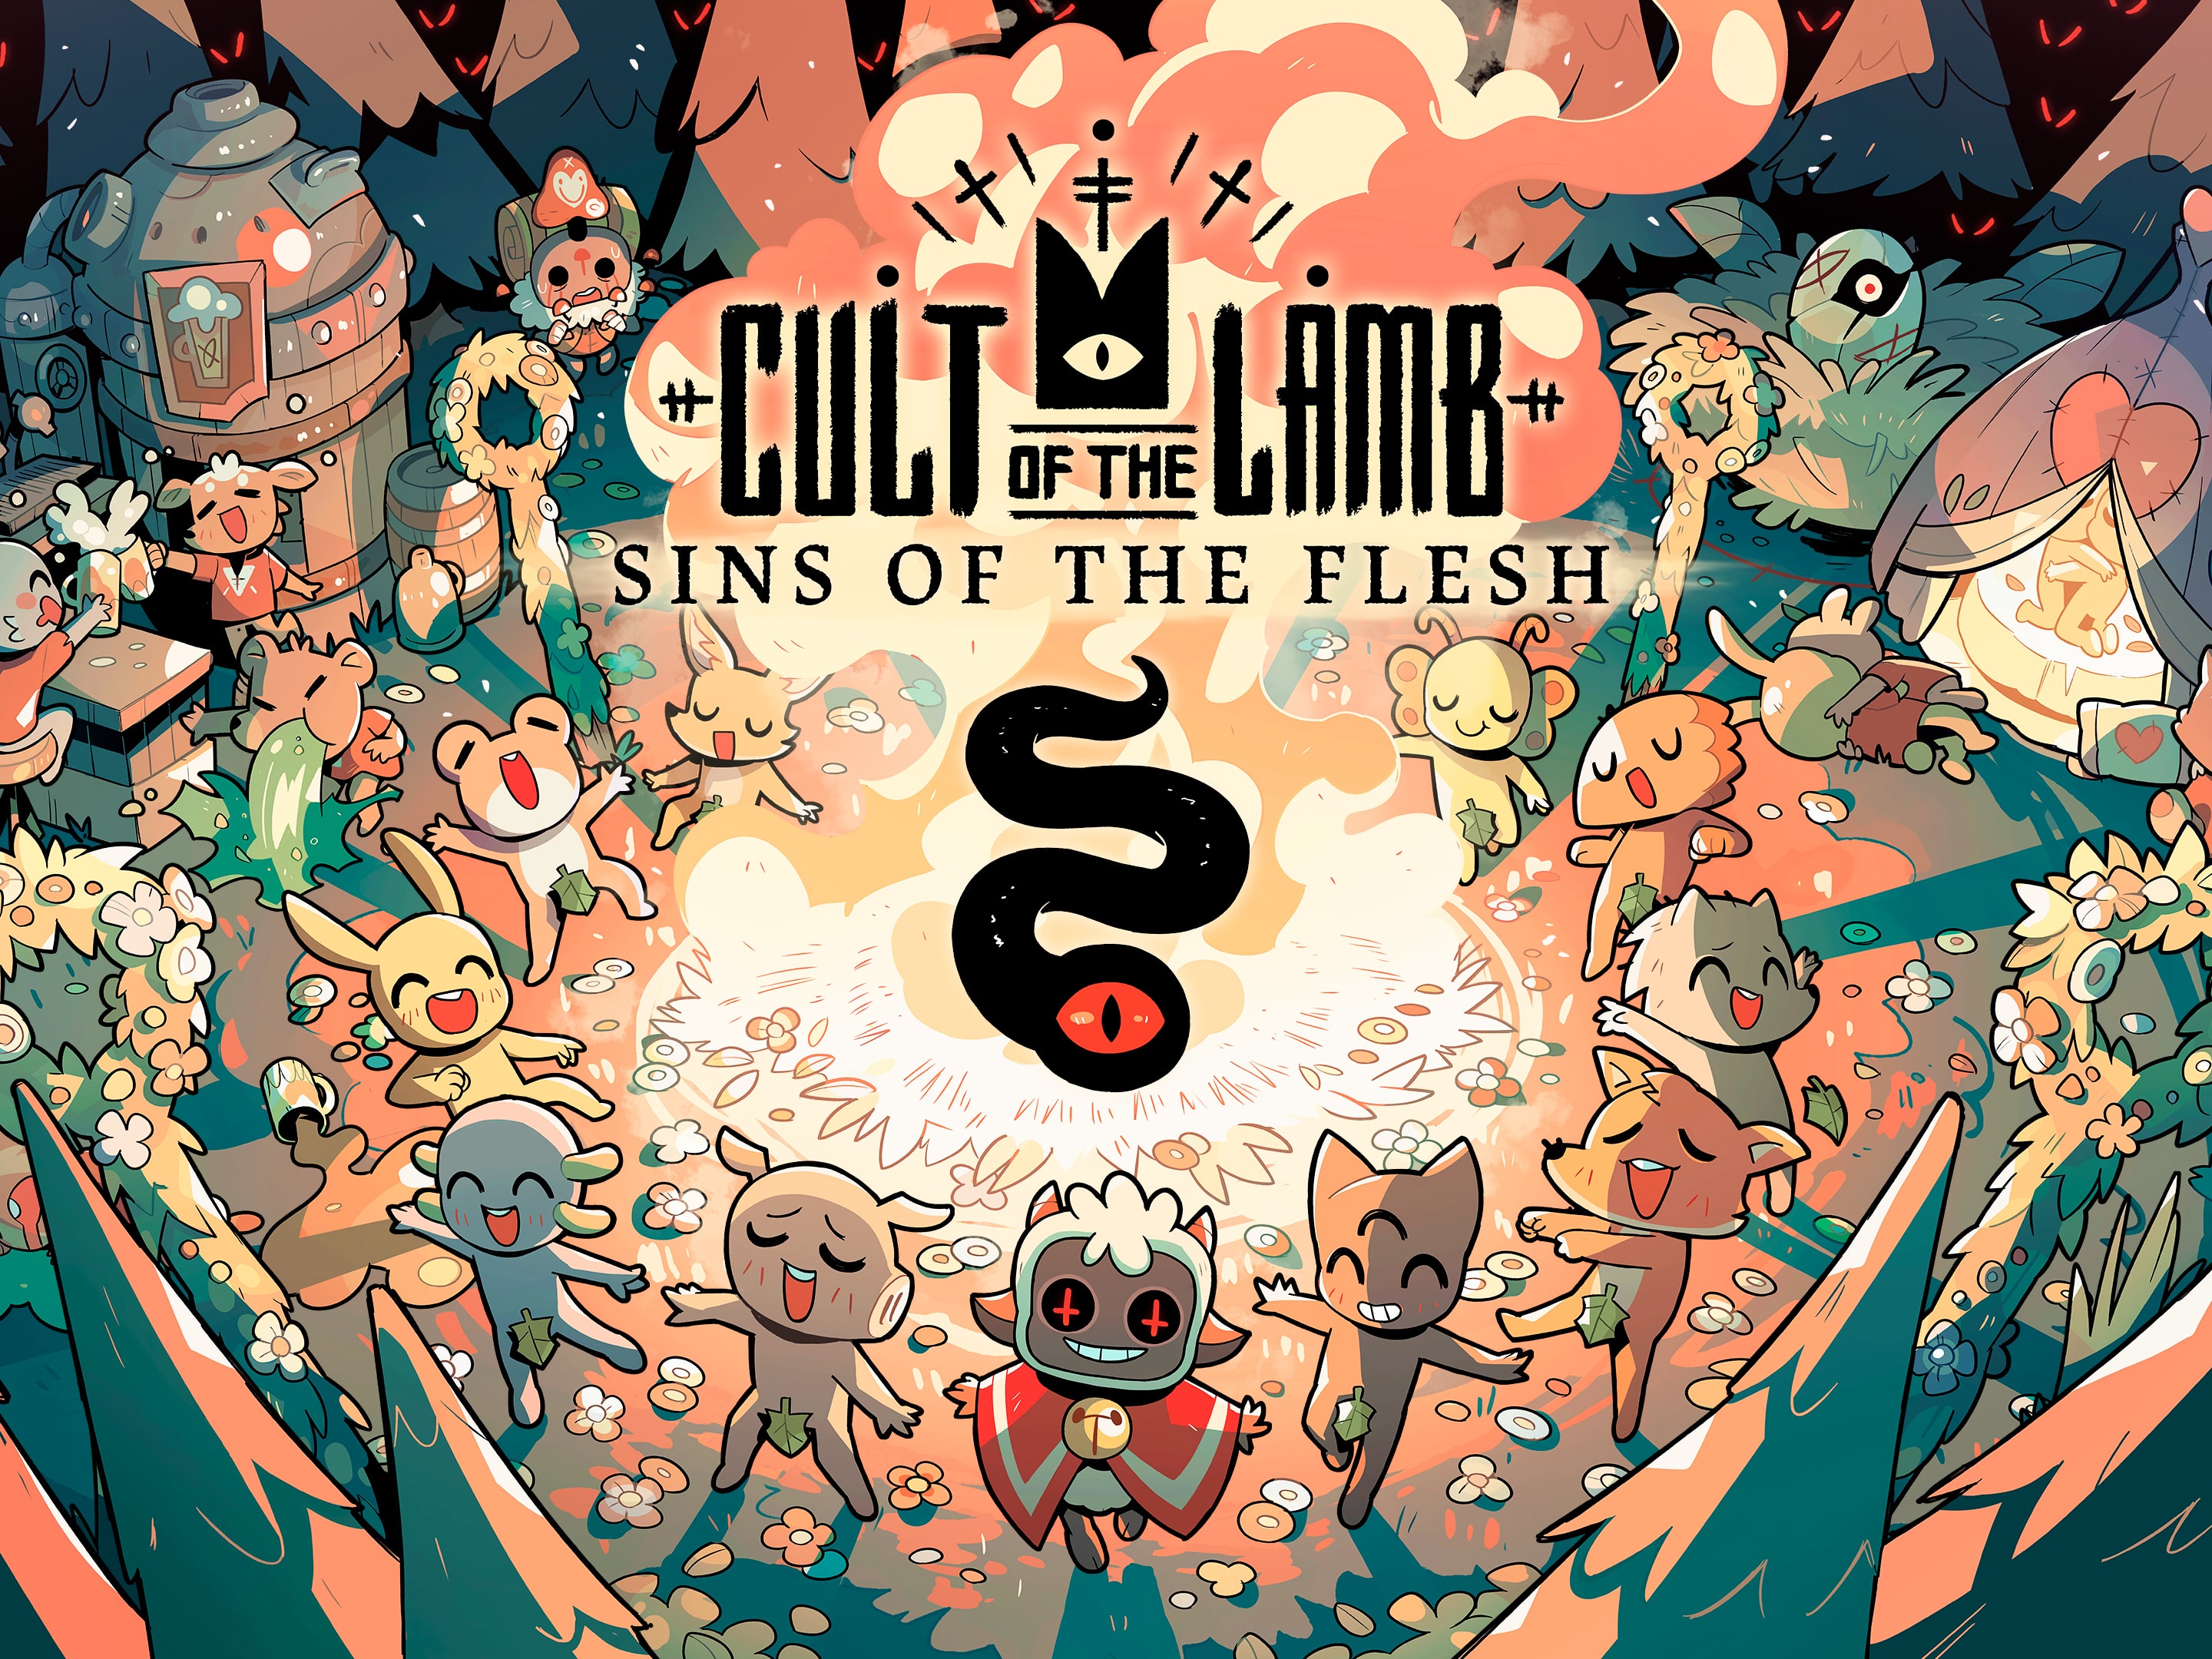 Buy Cult of the Lamb - Deluxe Edition on PlayStation 5